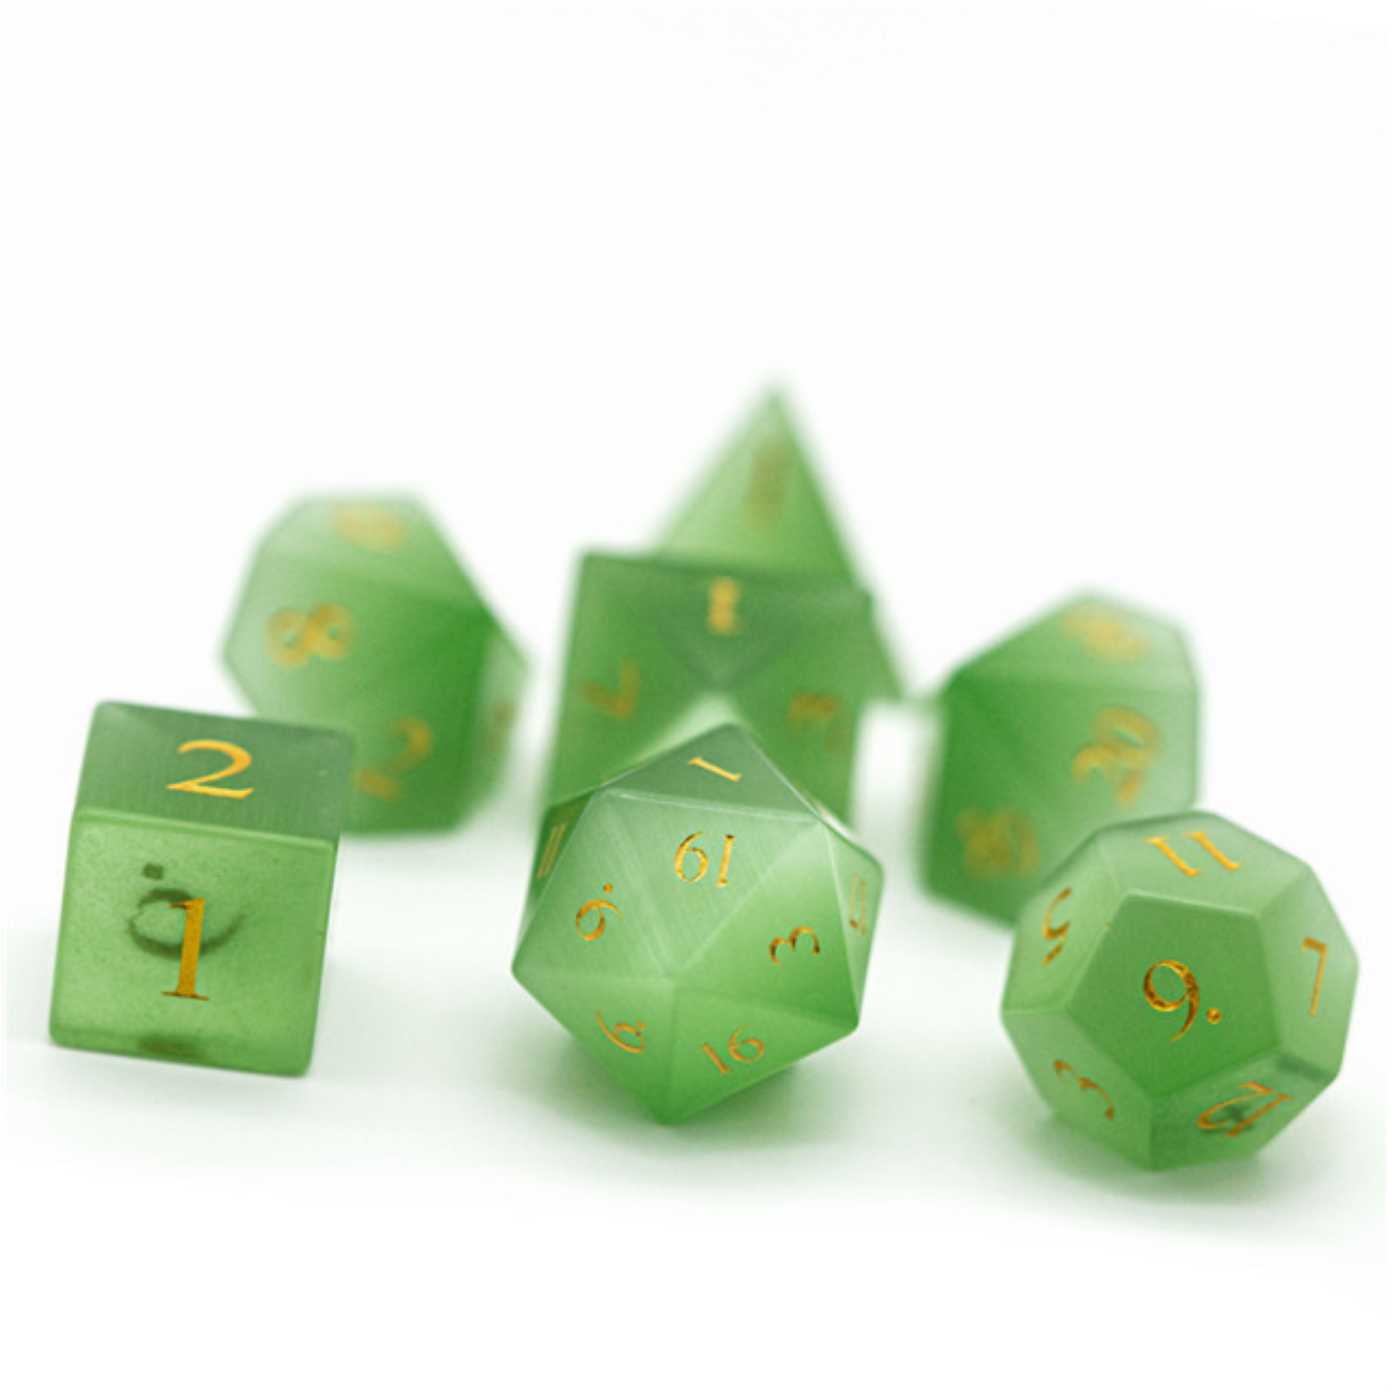 Cat's Eye Green - Gemstone Engraved with Gold Stone Dice Foam Brain Games